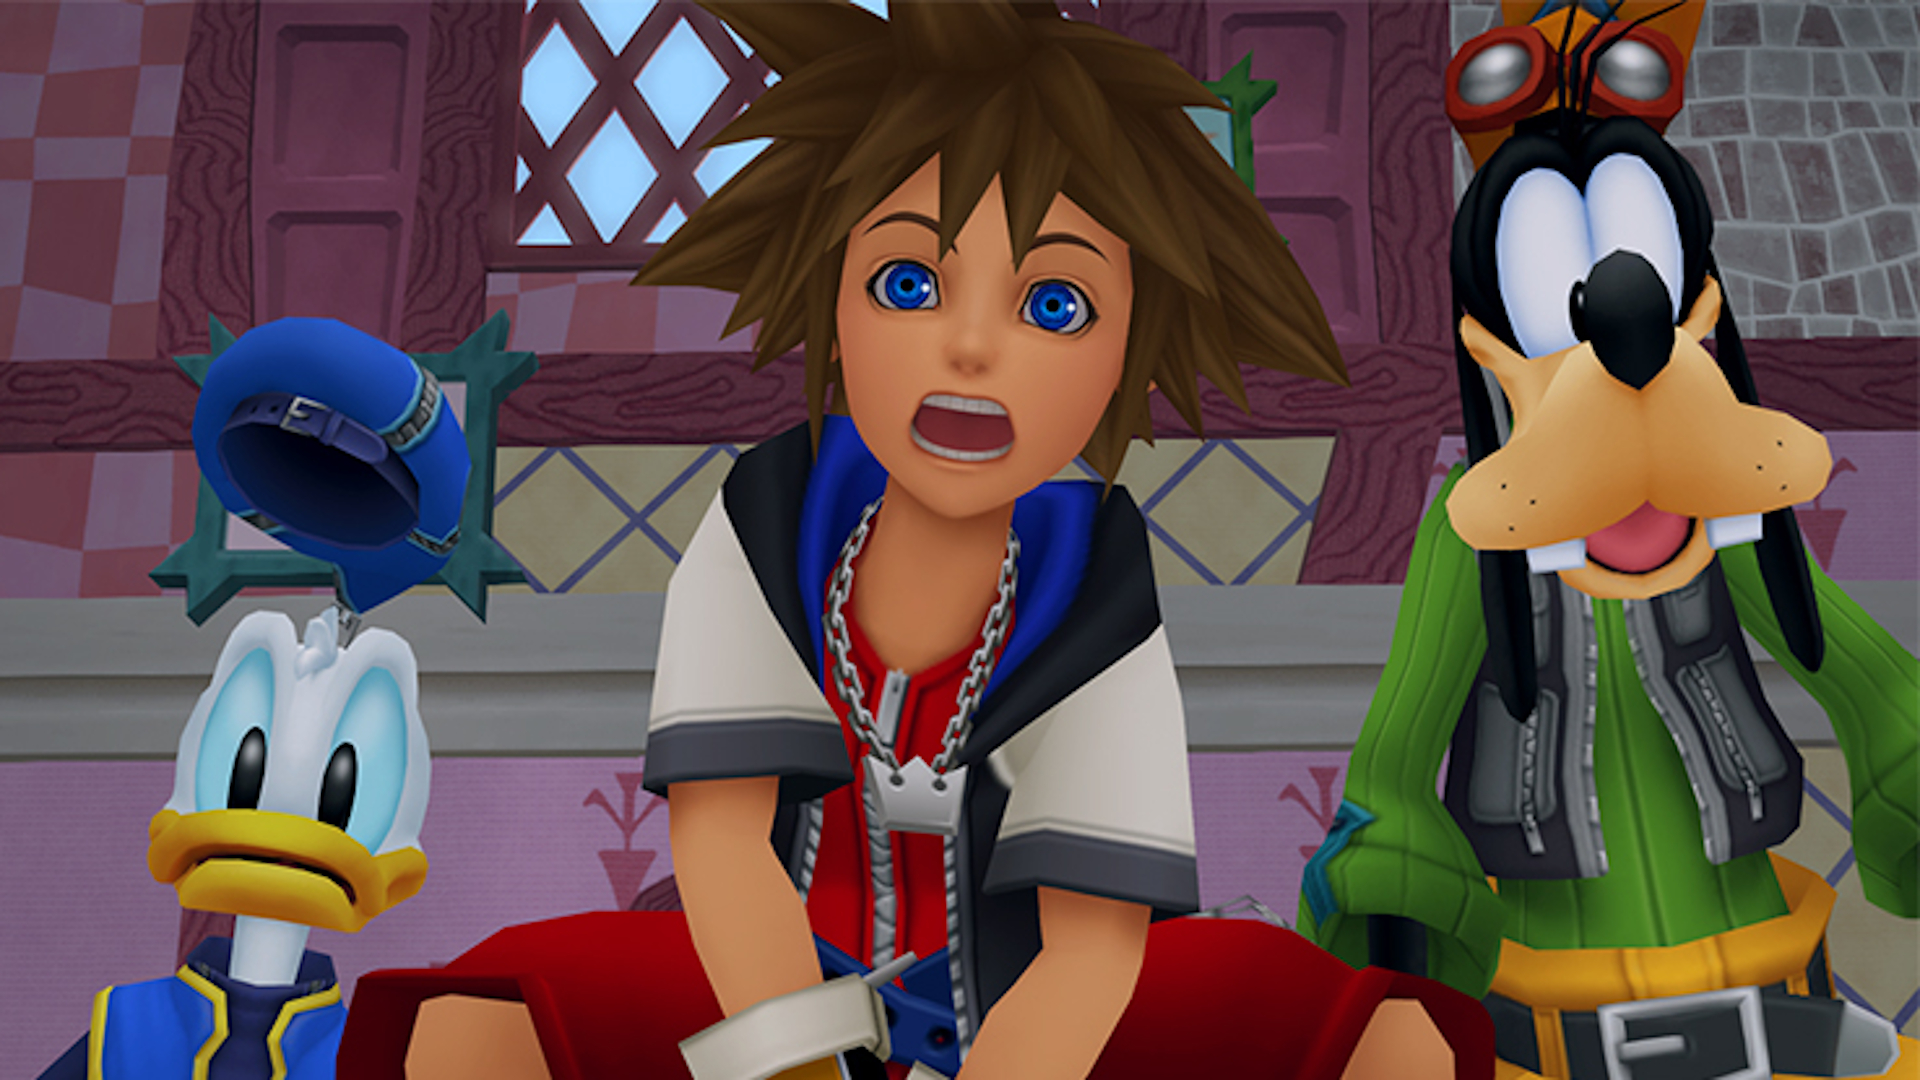  Kingdom Hearts PC save files are tucked inside cute PNG images, because of course they are 